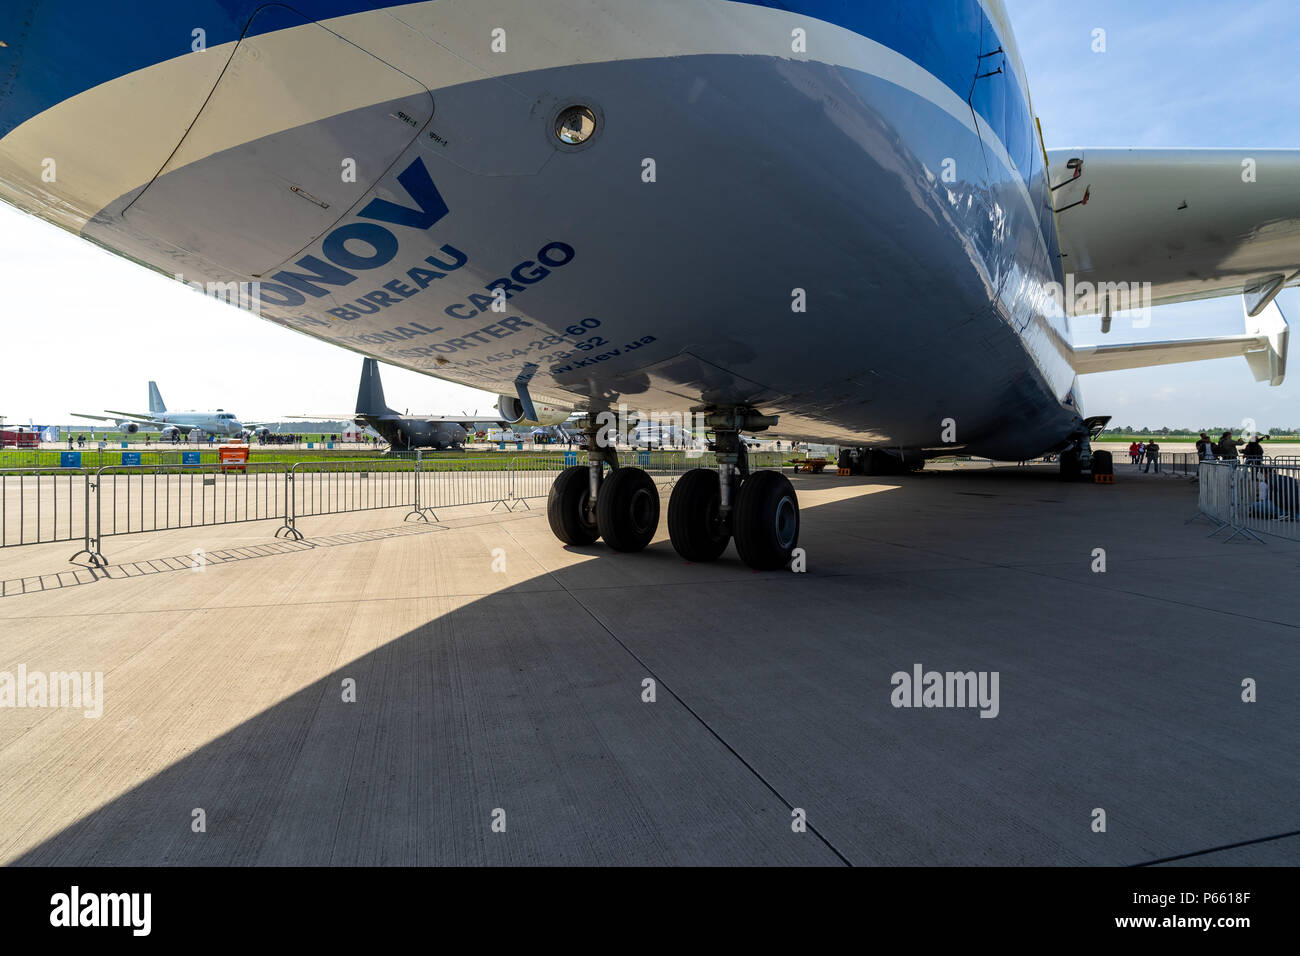 Nose landing gear of the strategic airliner Antonov An-225 Mriya by Antonov Airlines. Exhibition ILA Berlin Air Show 2018 Stock Photo